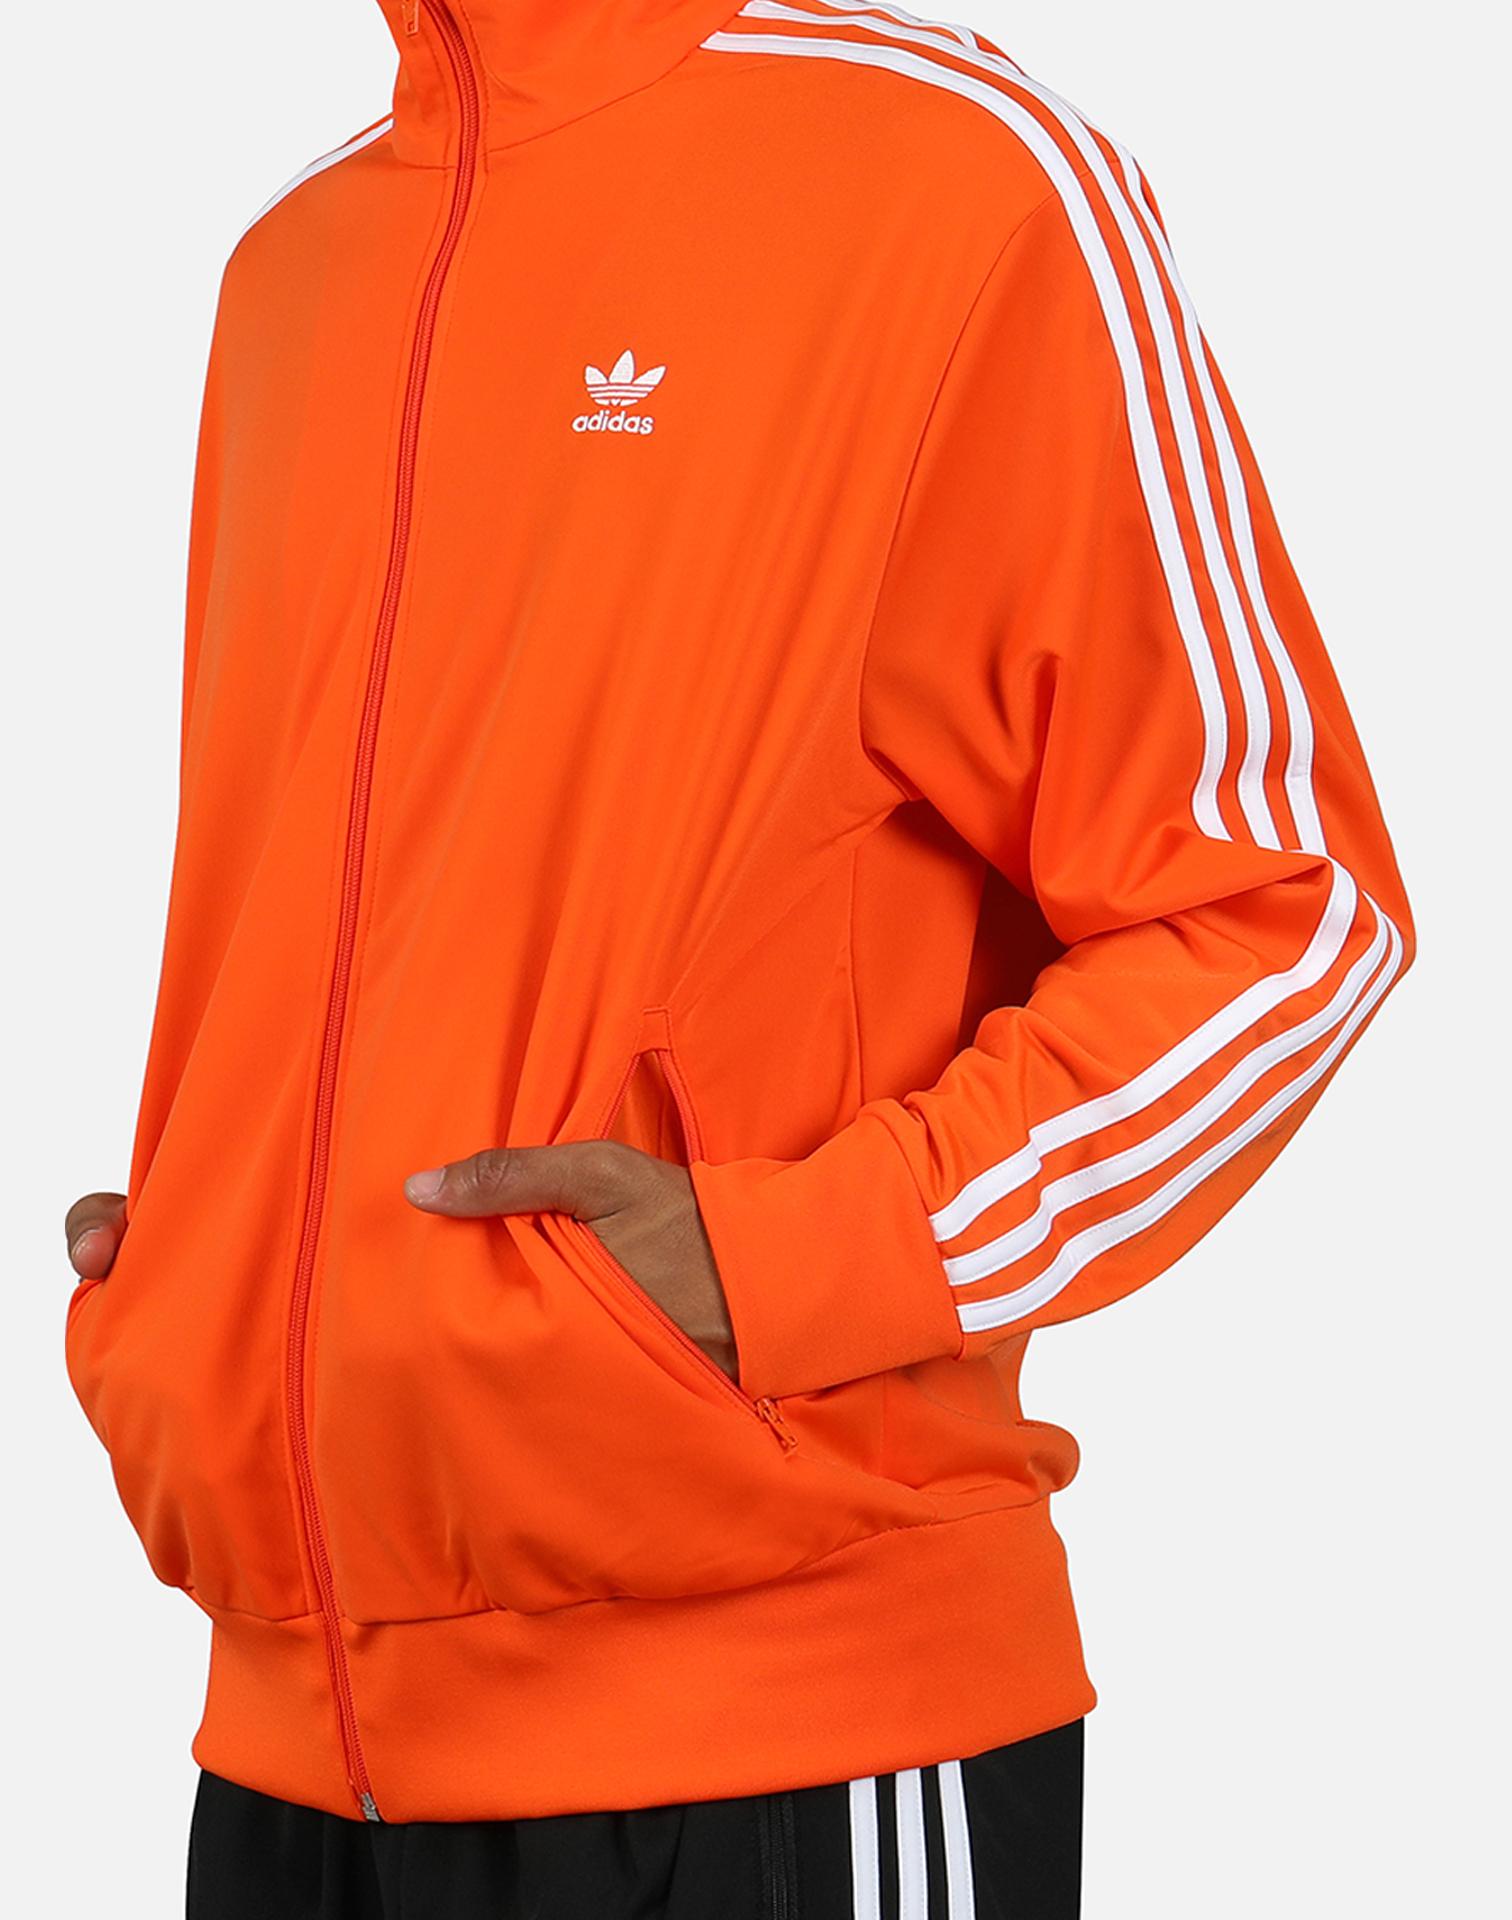 adidas Synthetic Firebird Track Jacket in Orange for Men - Lyst